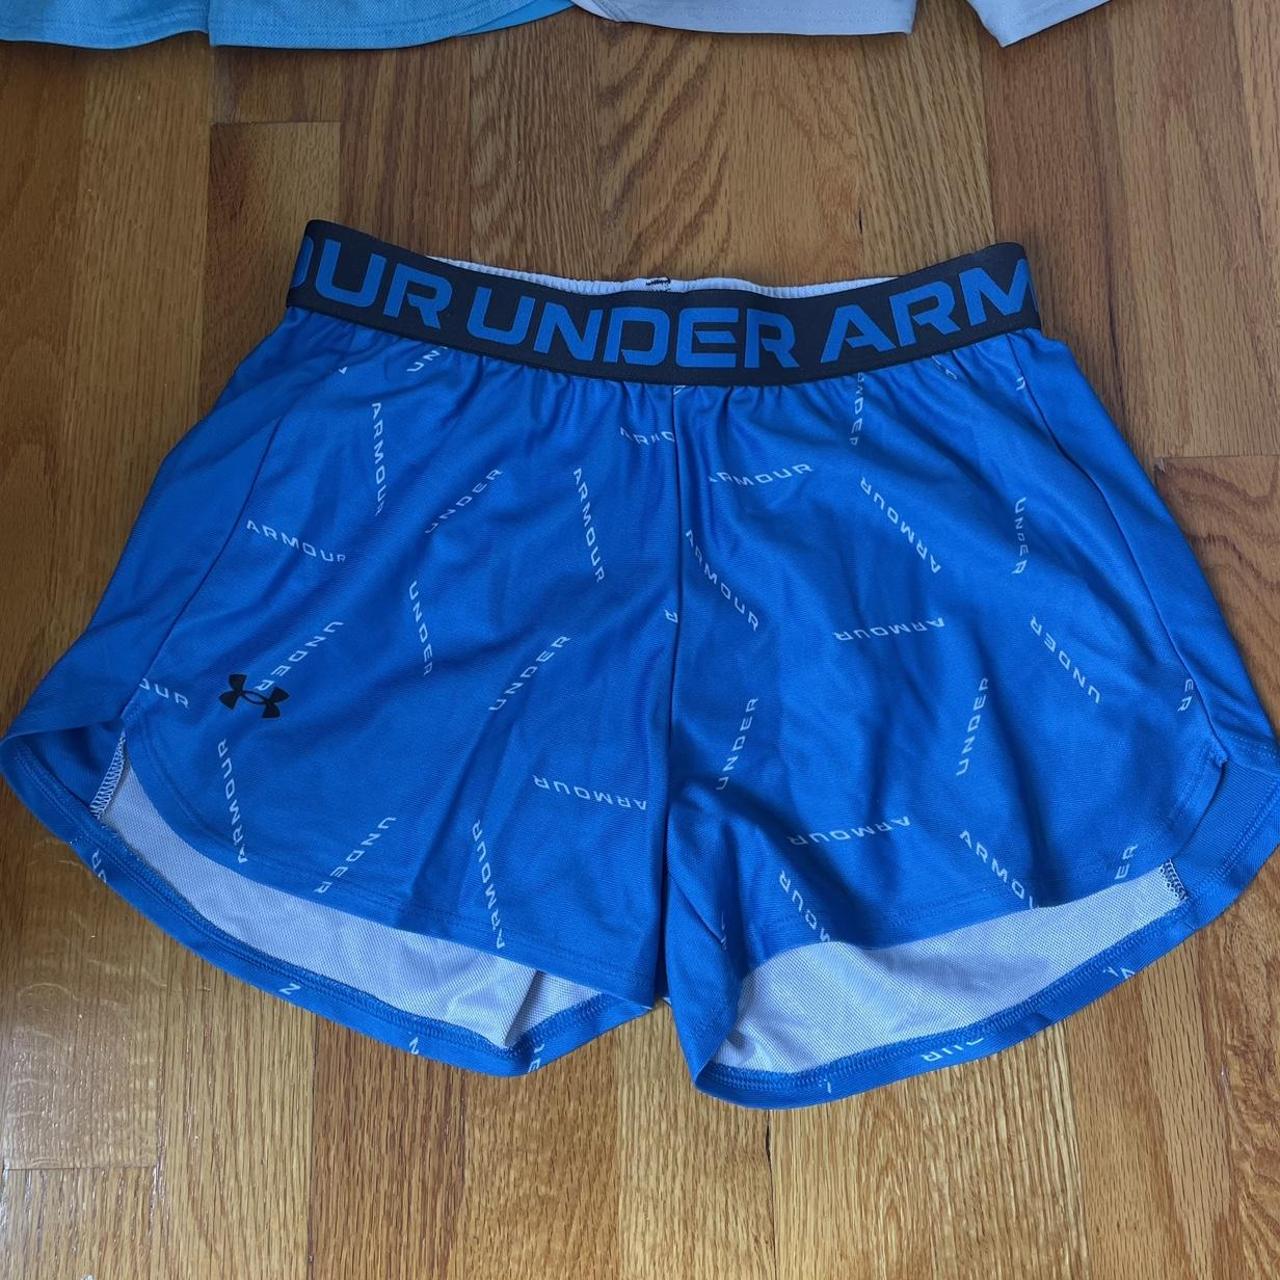 Size XS Under Armor Shorts , Comes with all four